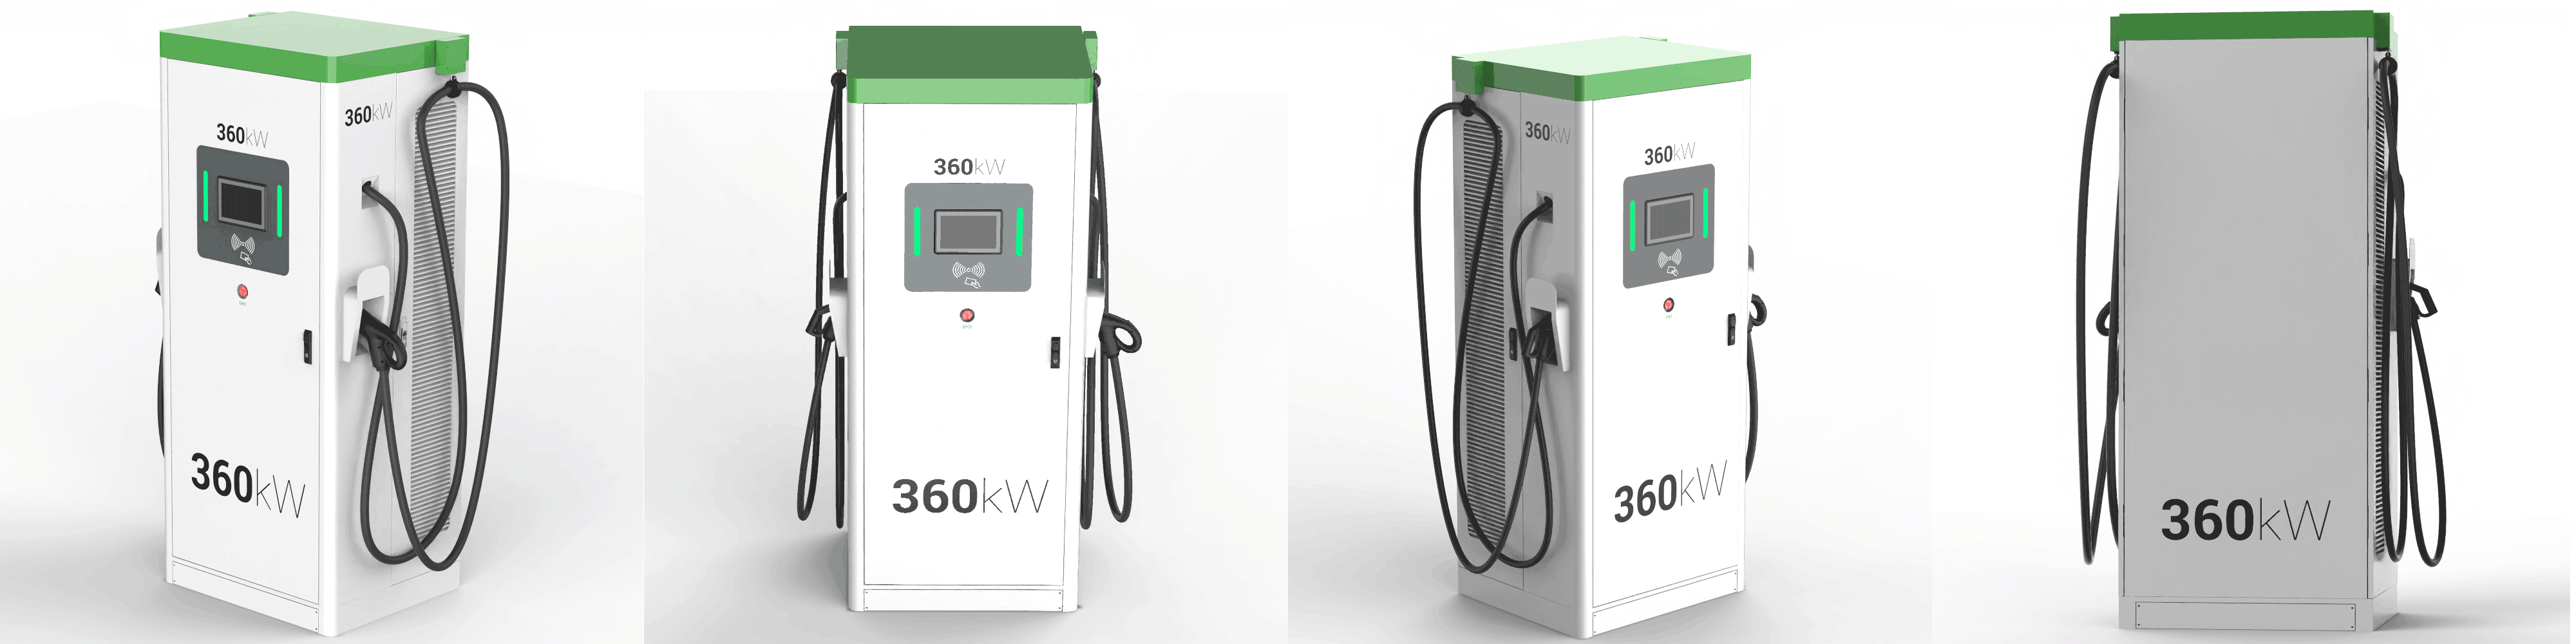 60kW-360kW DC Fast Charging Stations